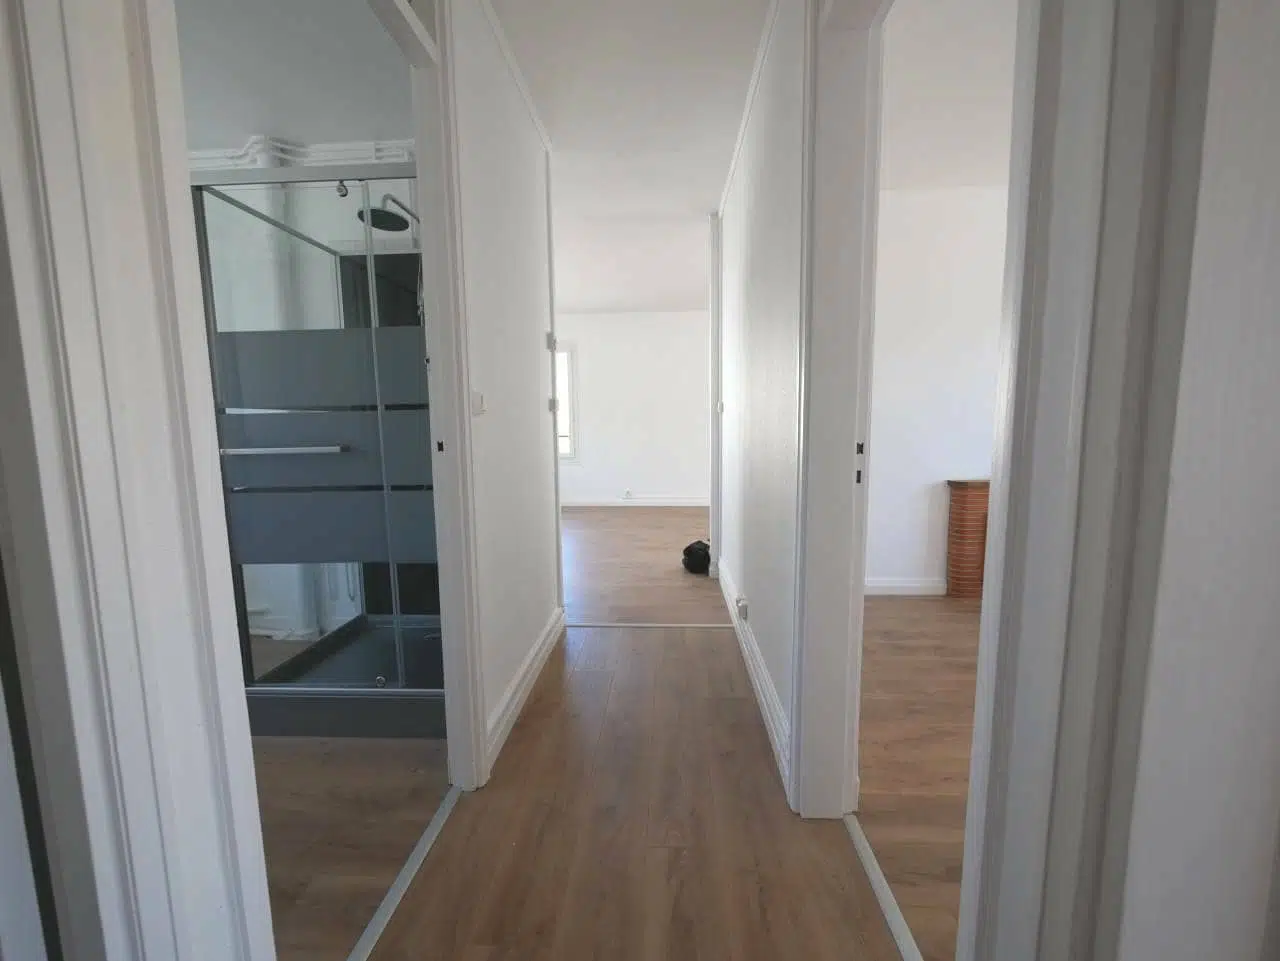 Location Appartement type F3 Le Havre 318